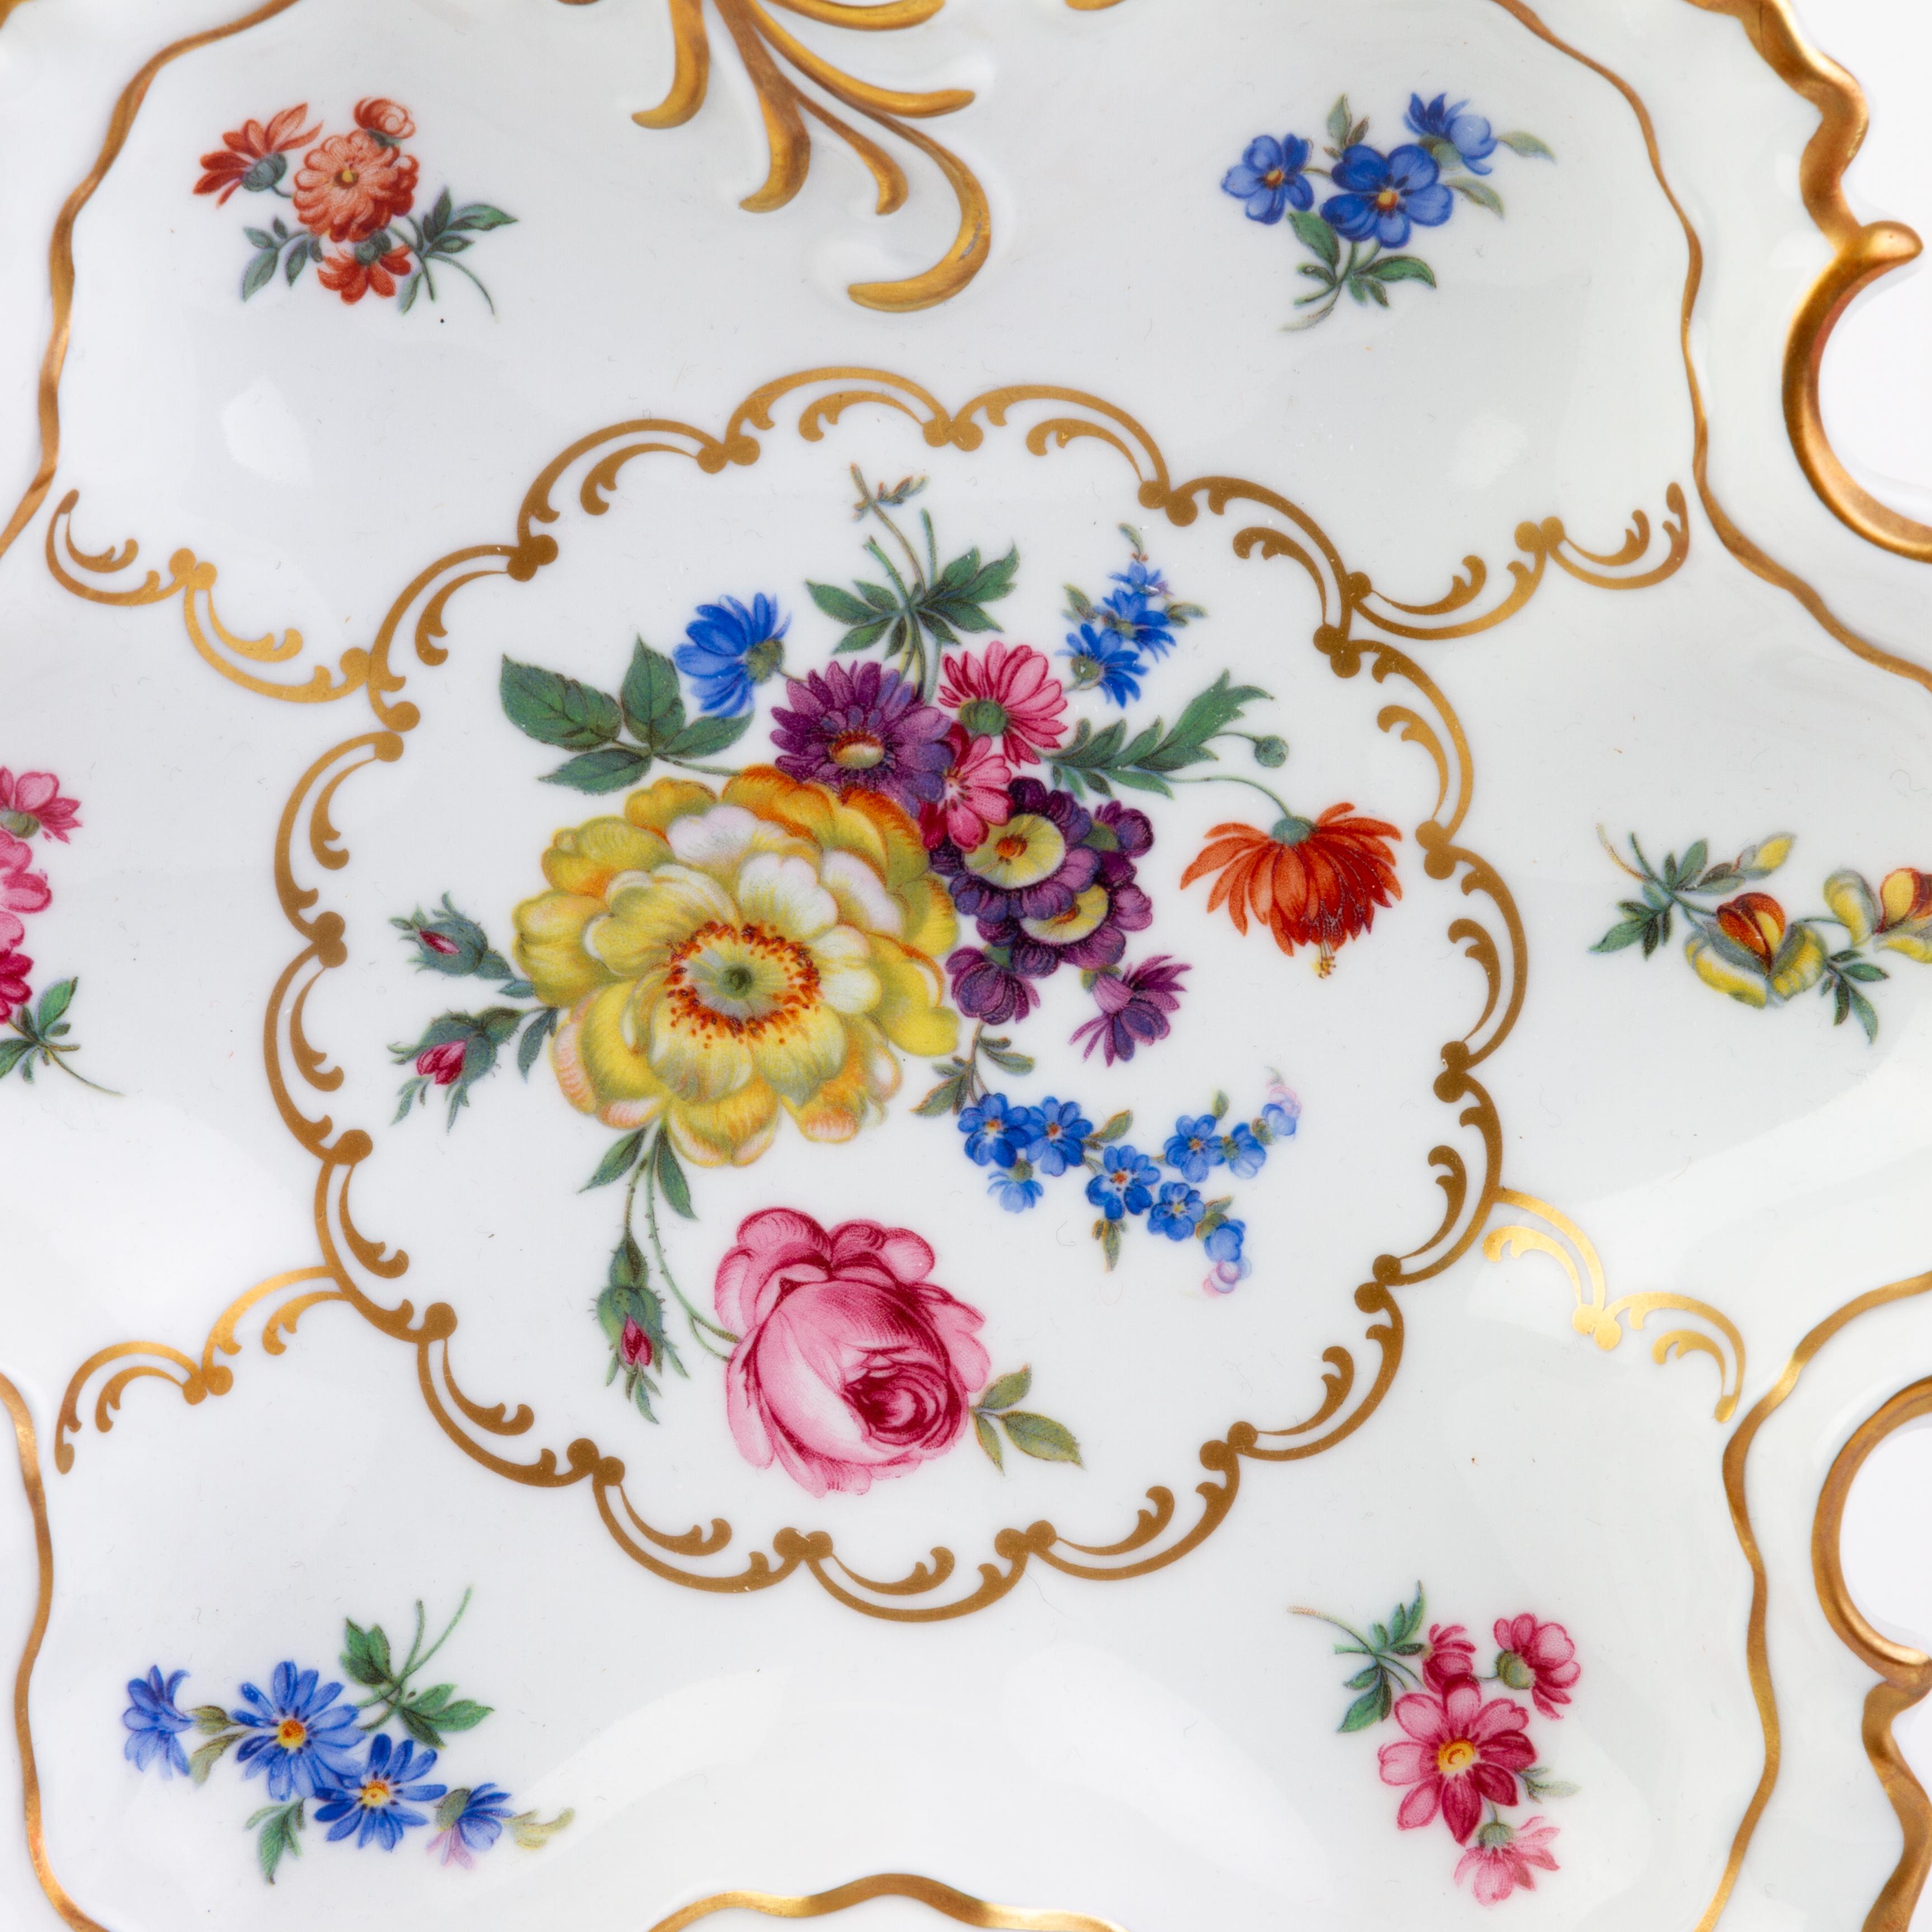 24K Gilt Gold Fine Porcelain German Hand Painted Floral Dish Plate 
Good condition 
Free international shipping.